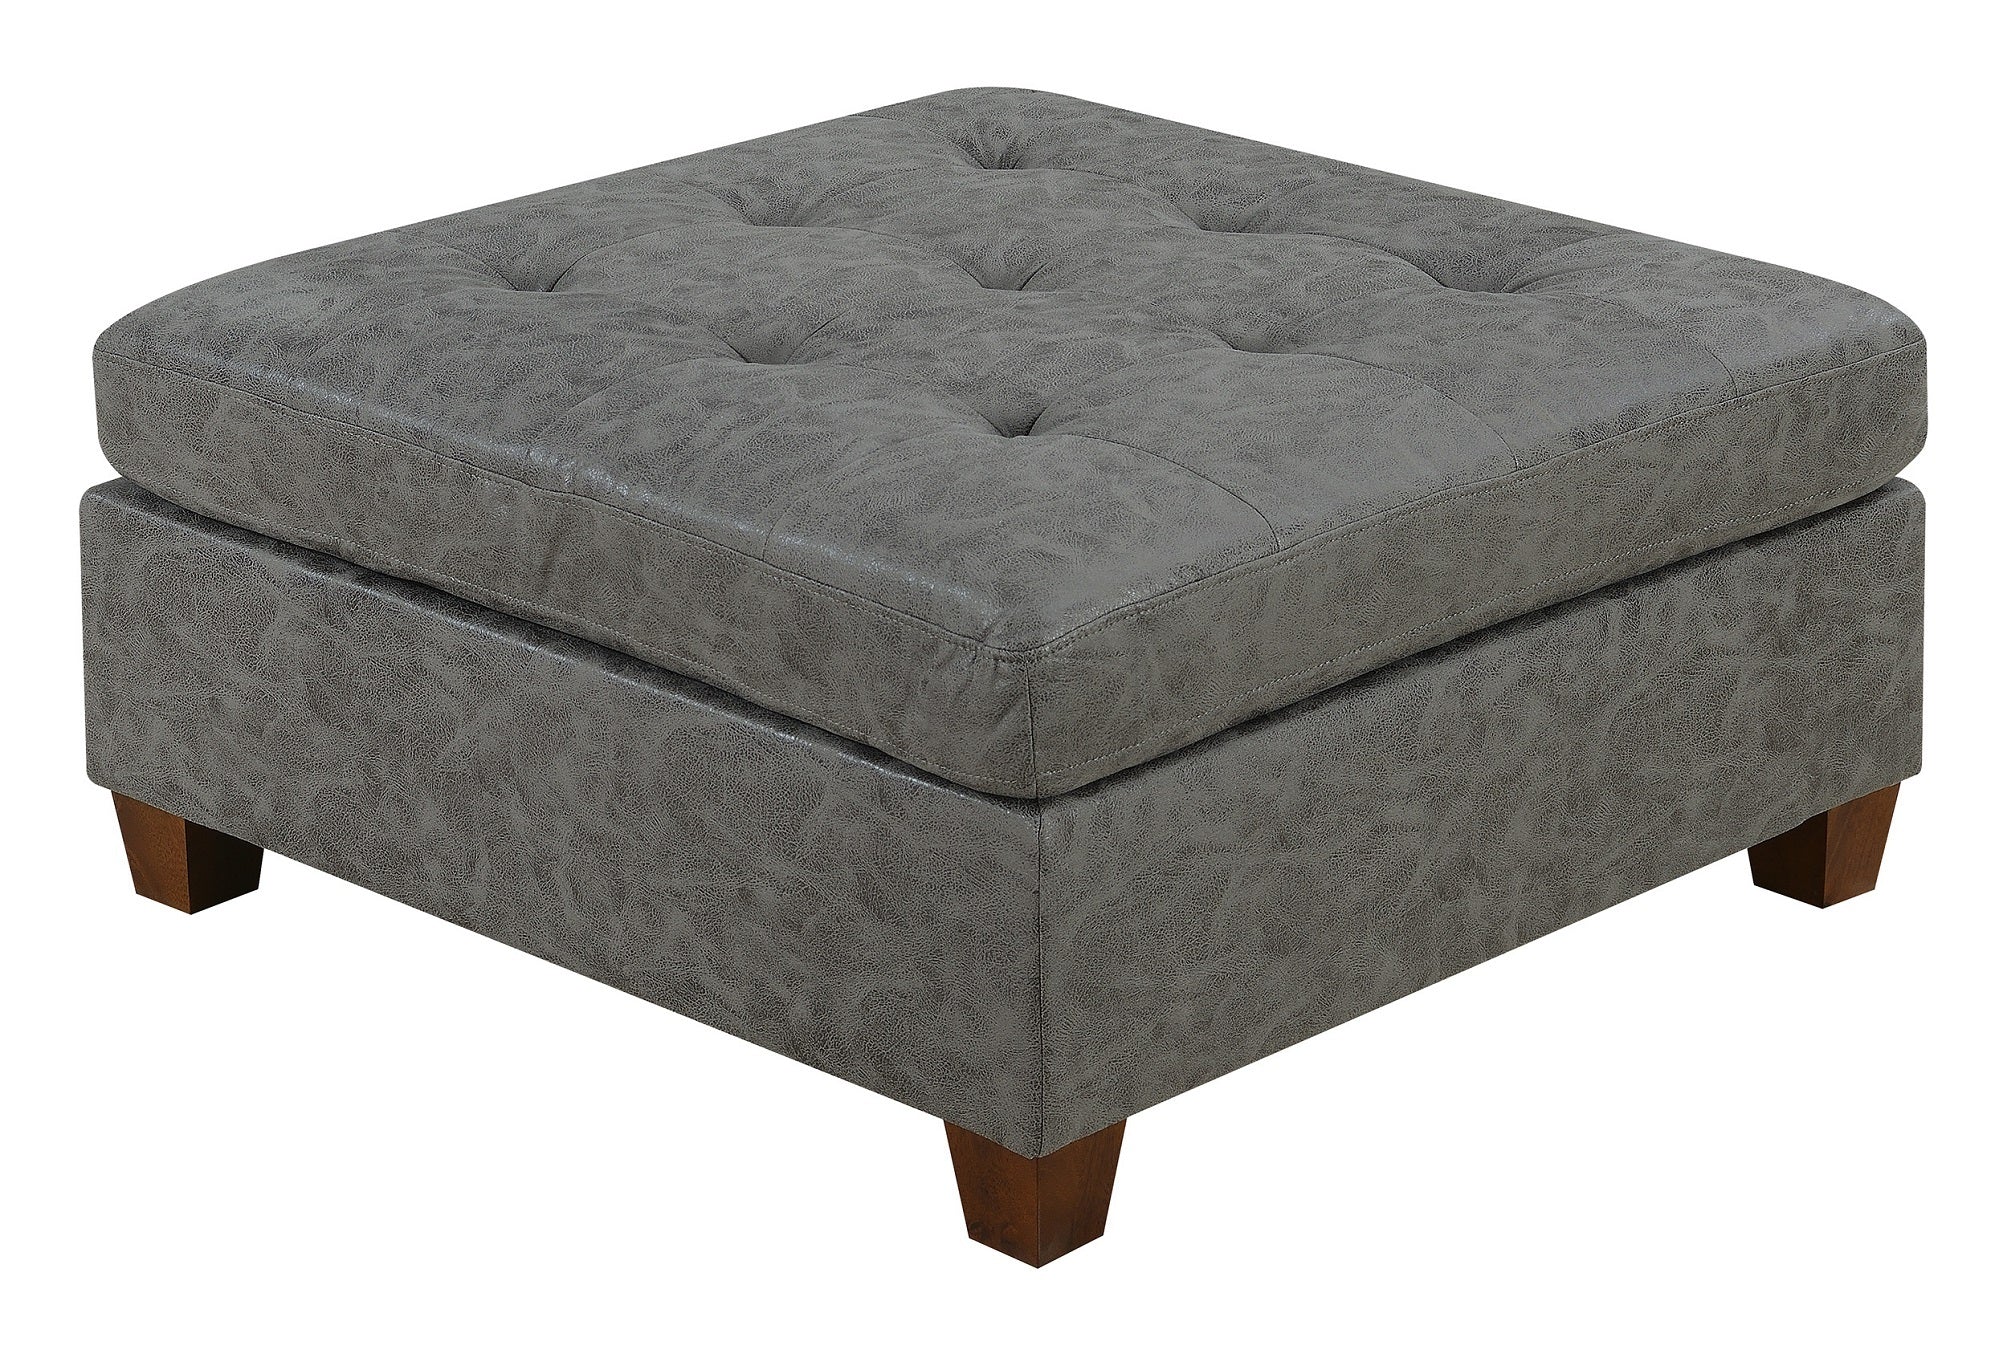 Living Room Furniture Tufted Cocktail Ottoman Antique grey-primary living